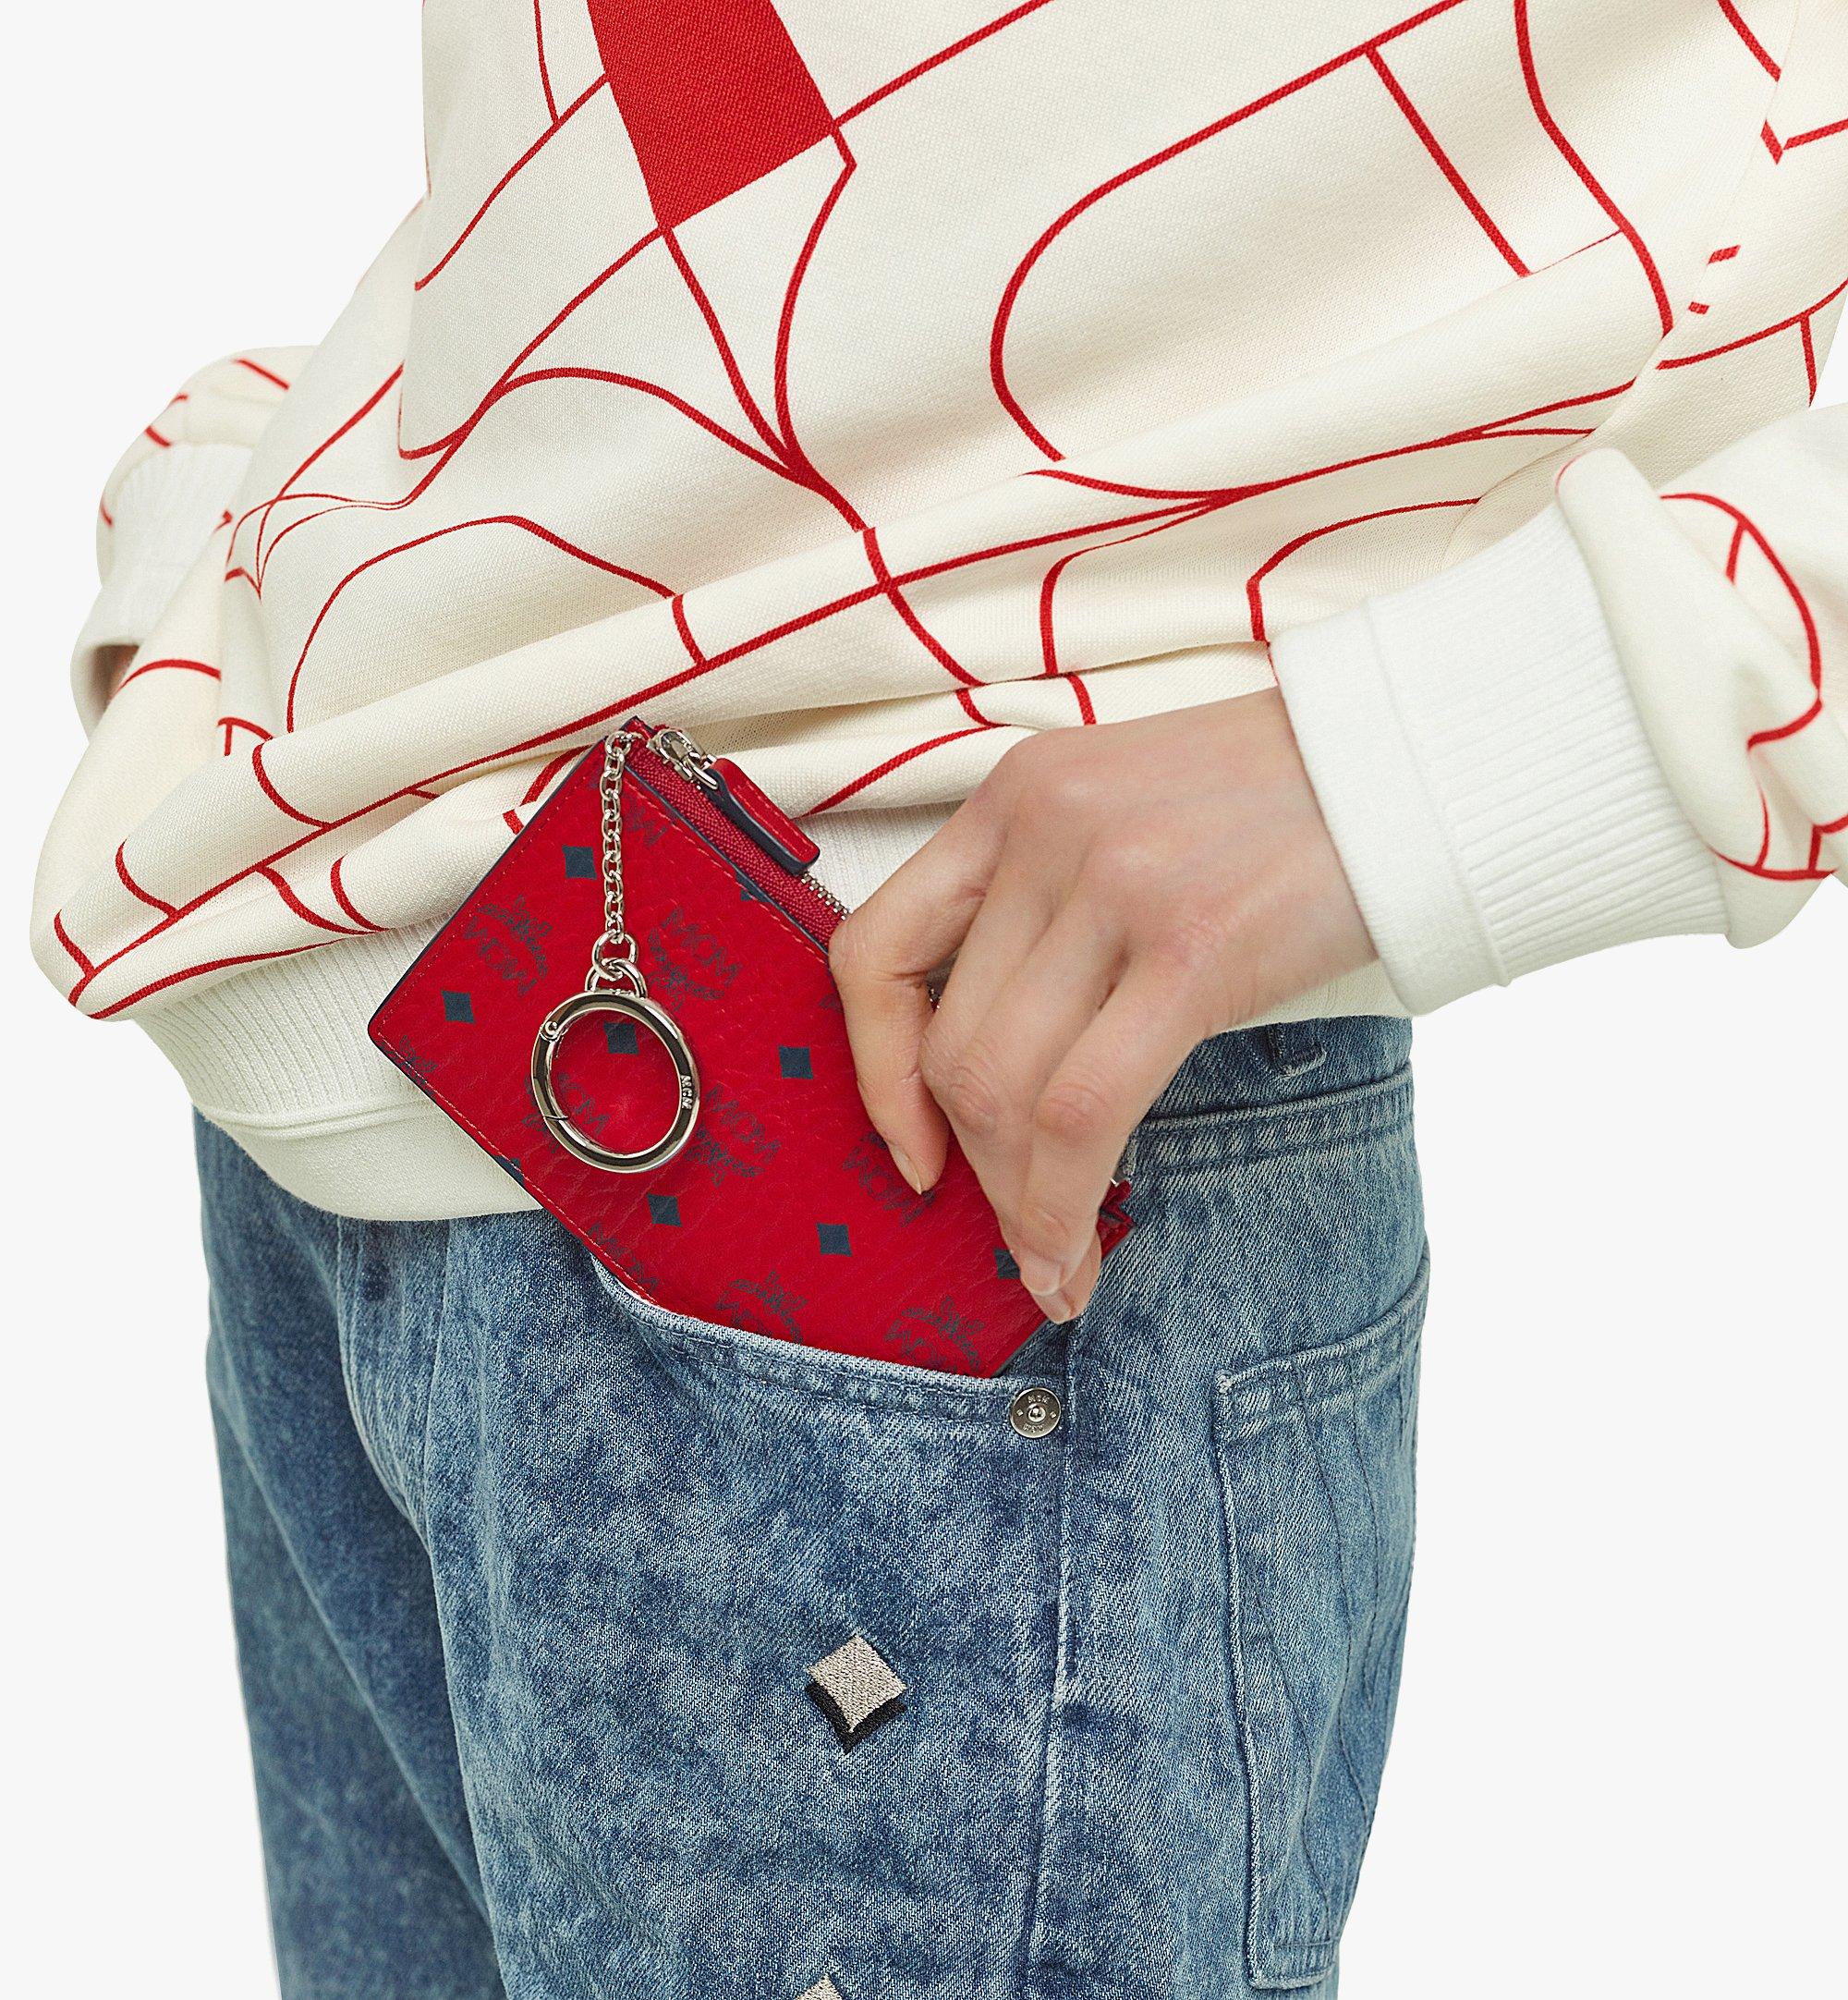 One Size Key Pouch in Visetos Original Red | MCM ®US